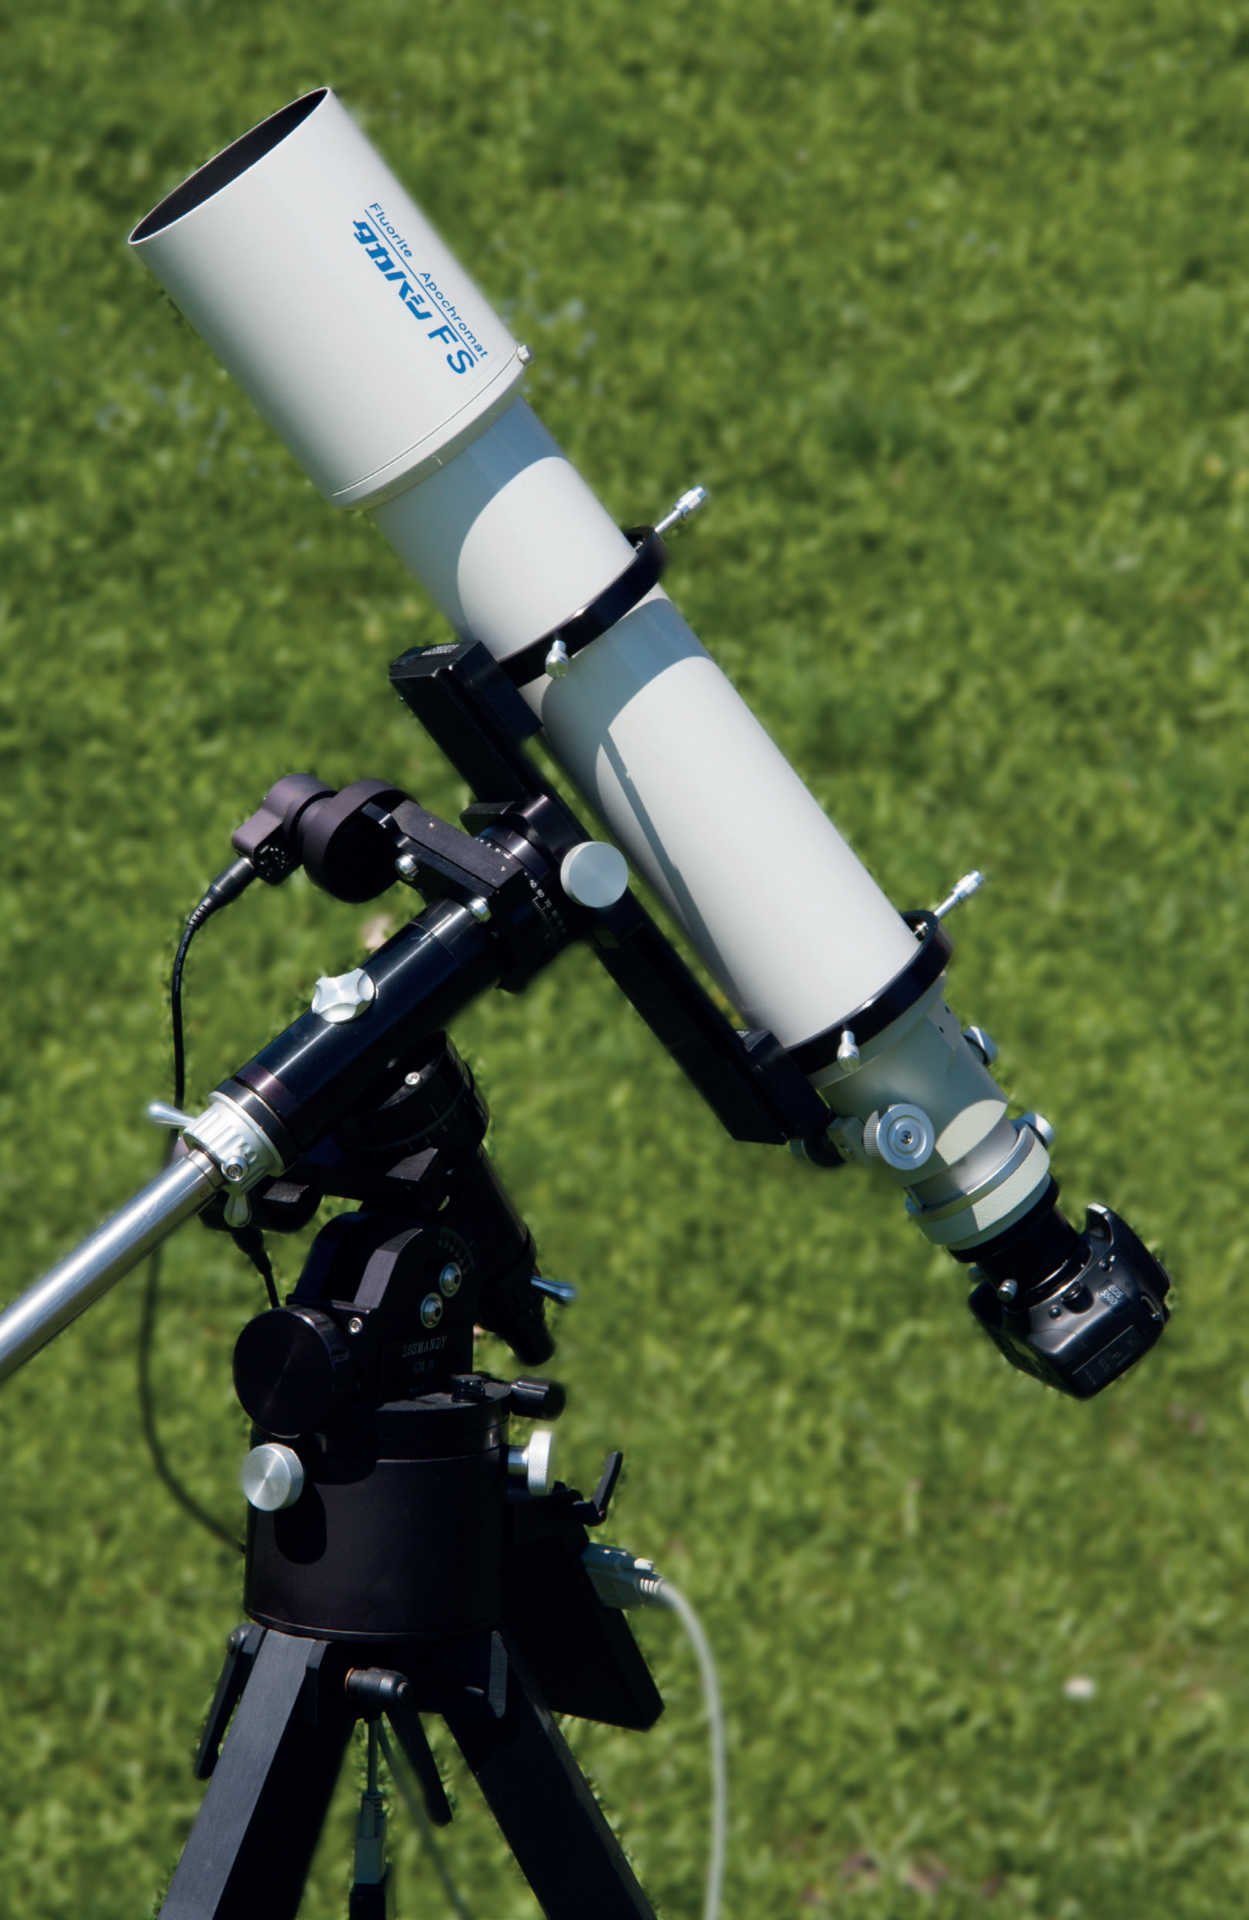 Most amateur astronomers will already own the hardware required for comet photography: a stable mount, a telescope (here a refractor with a focal length of around 1,000mm) and an adaptable DSLR 